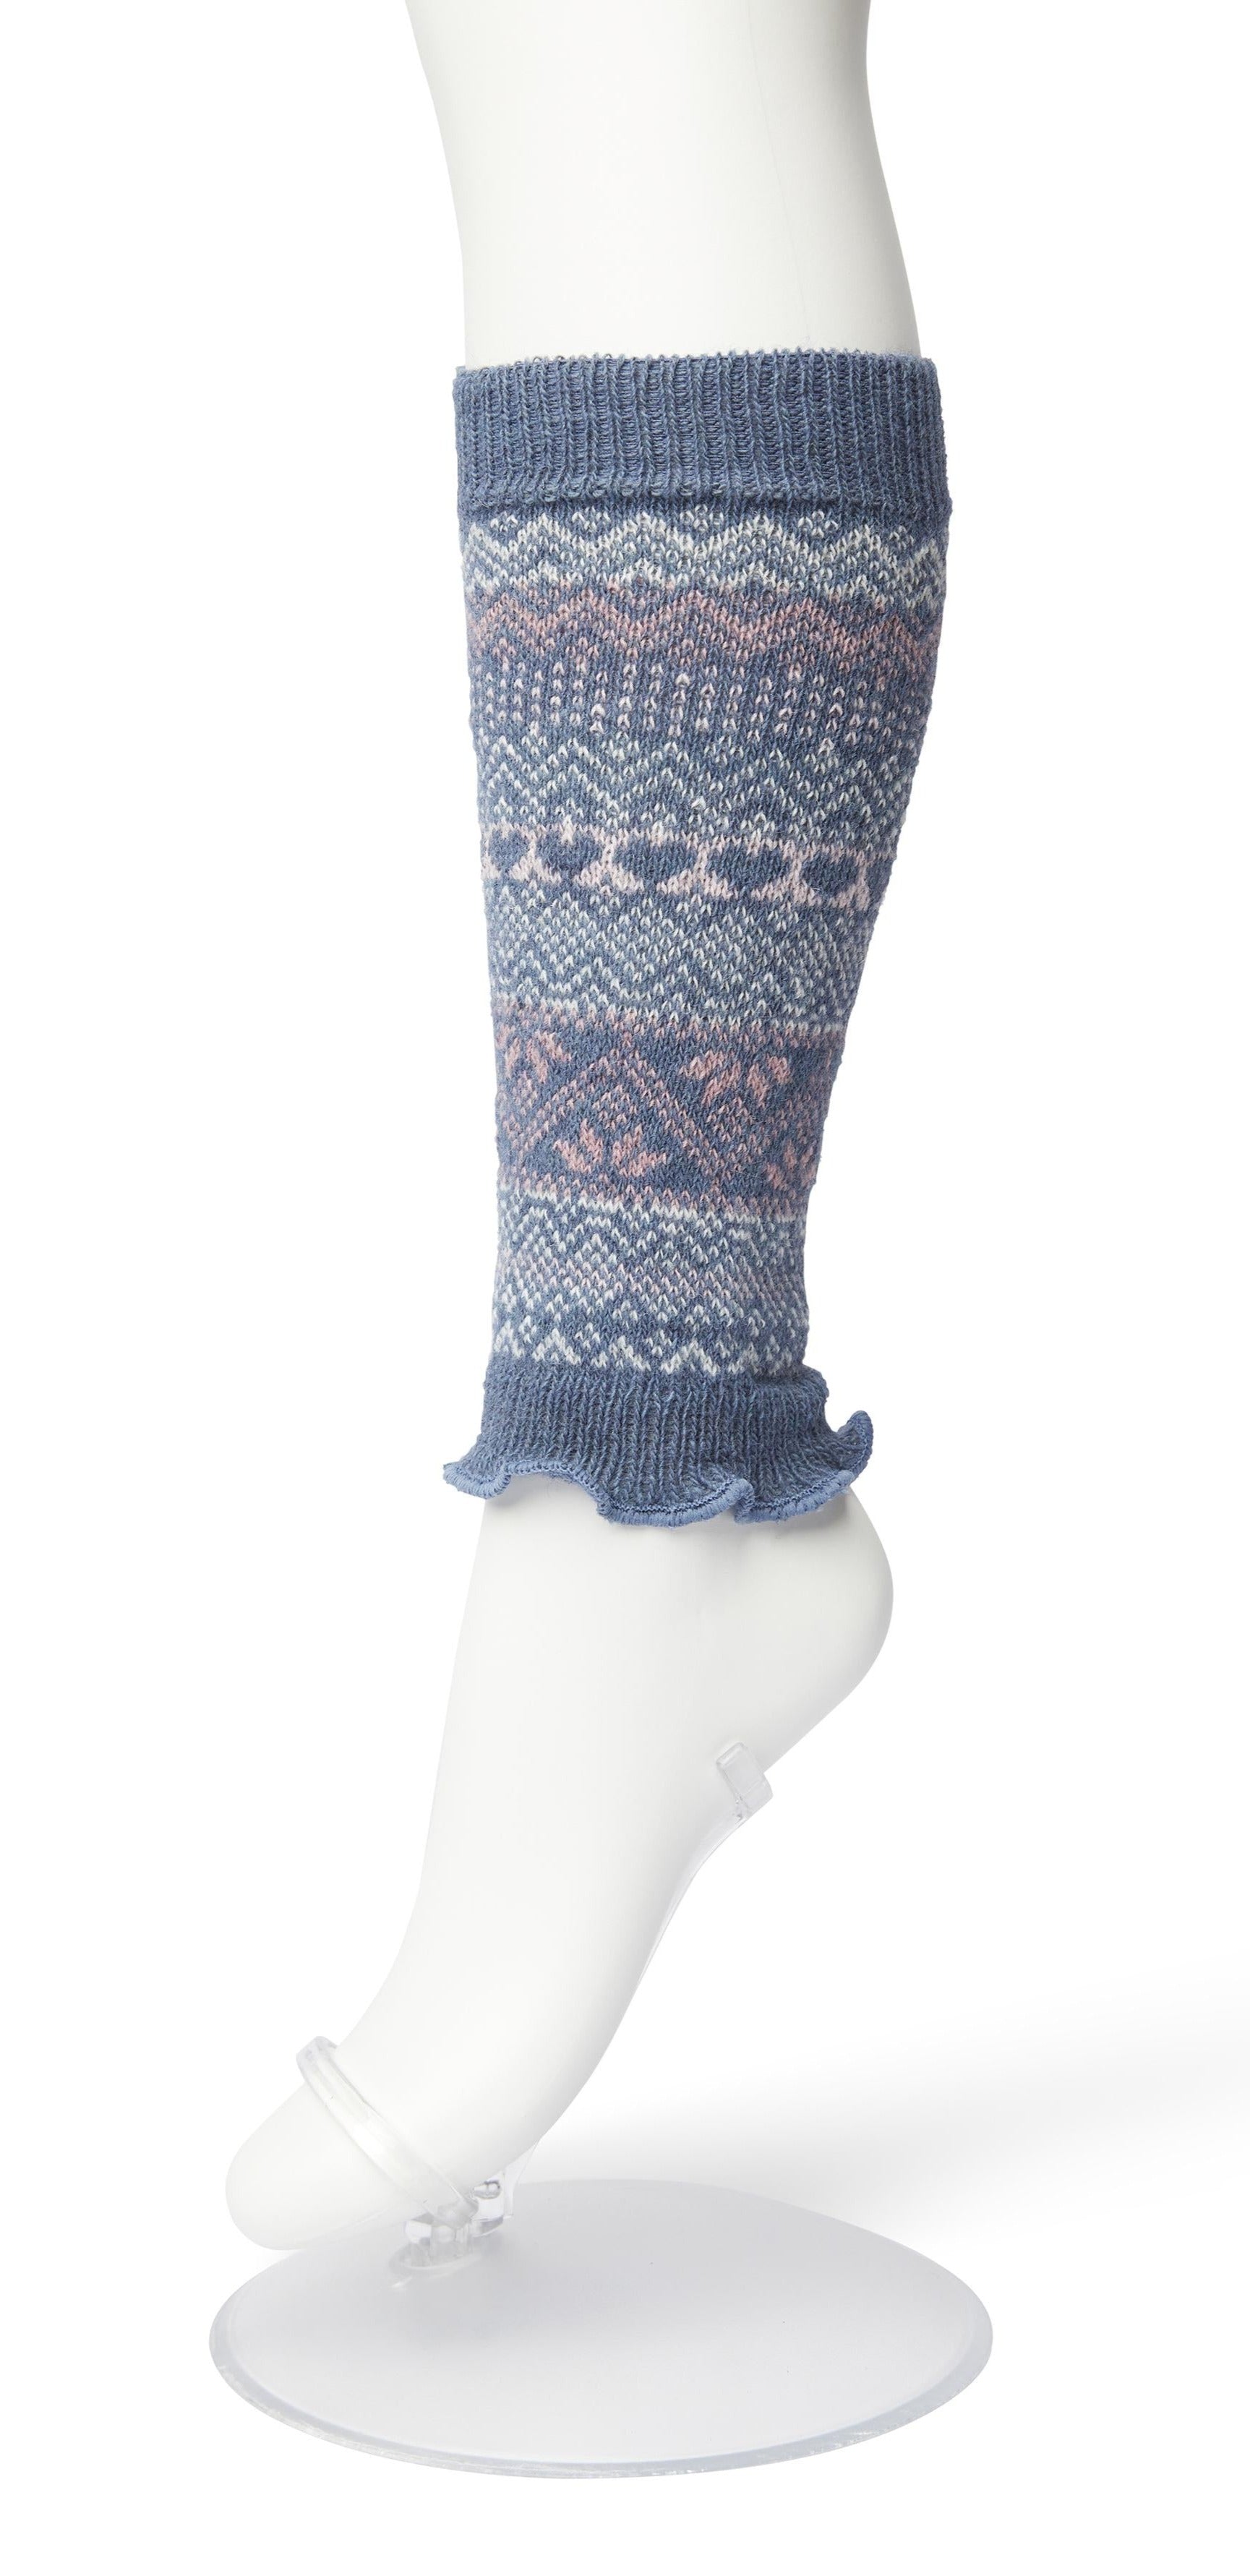 Bonnie Doon BP051729 Folkloric Legwarmers - Light pale blue grey, baby pink and white warm and soft knee length knitted leg-warmers with a fairisle style pattern, elasticated cuff and frill edge.